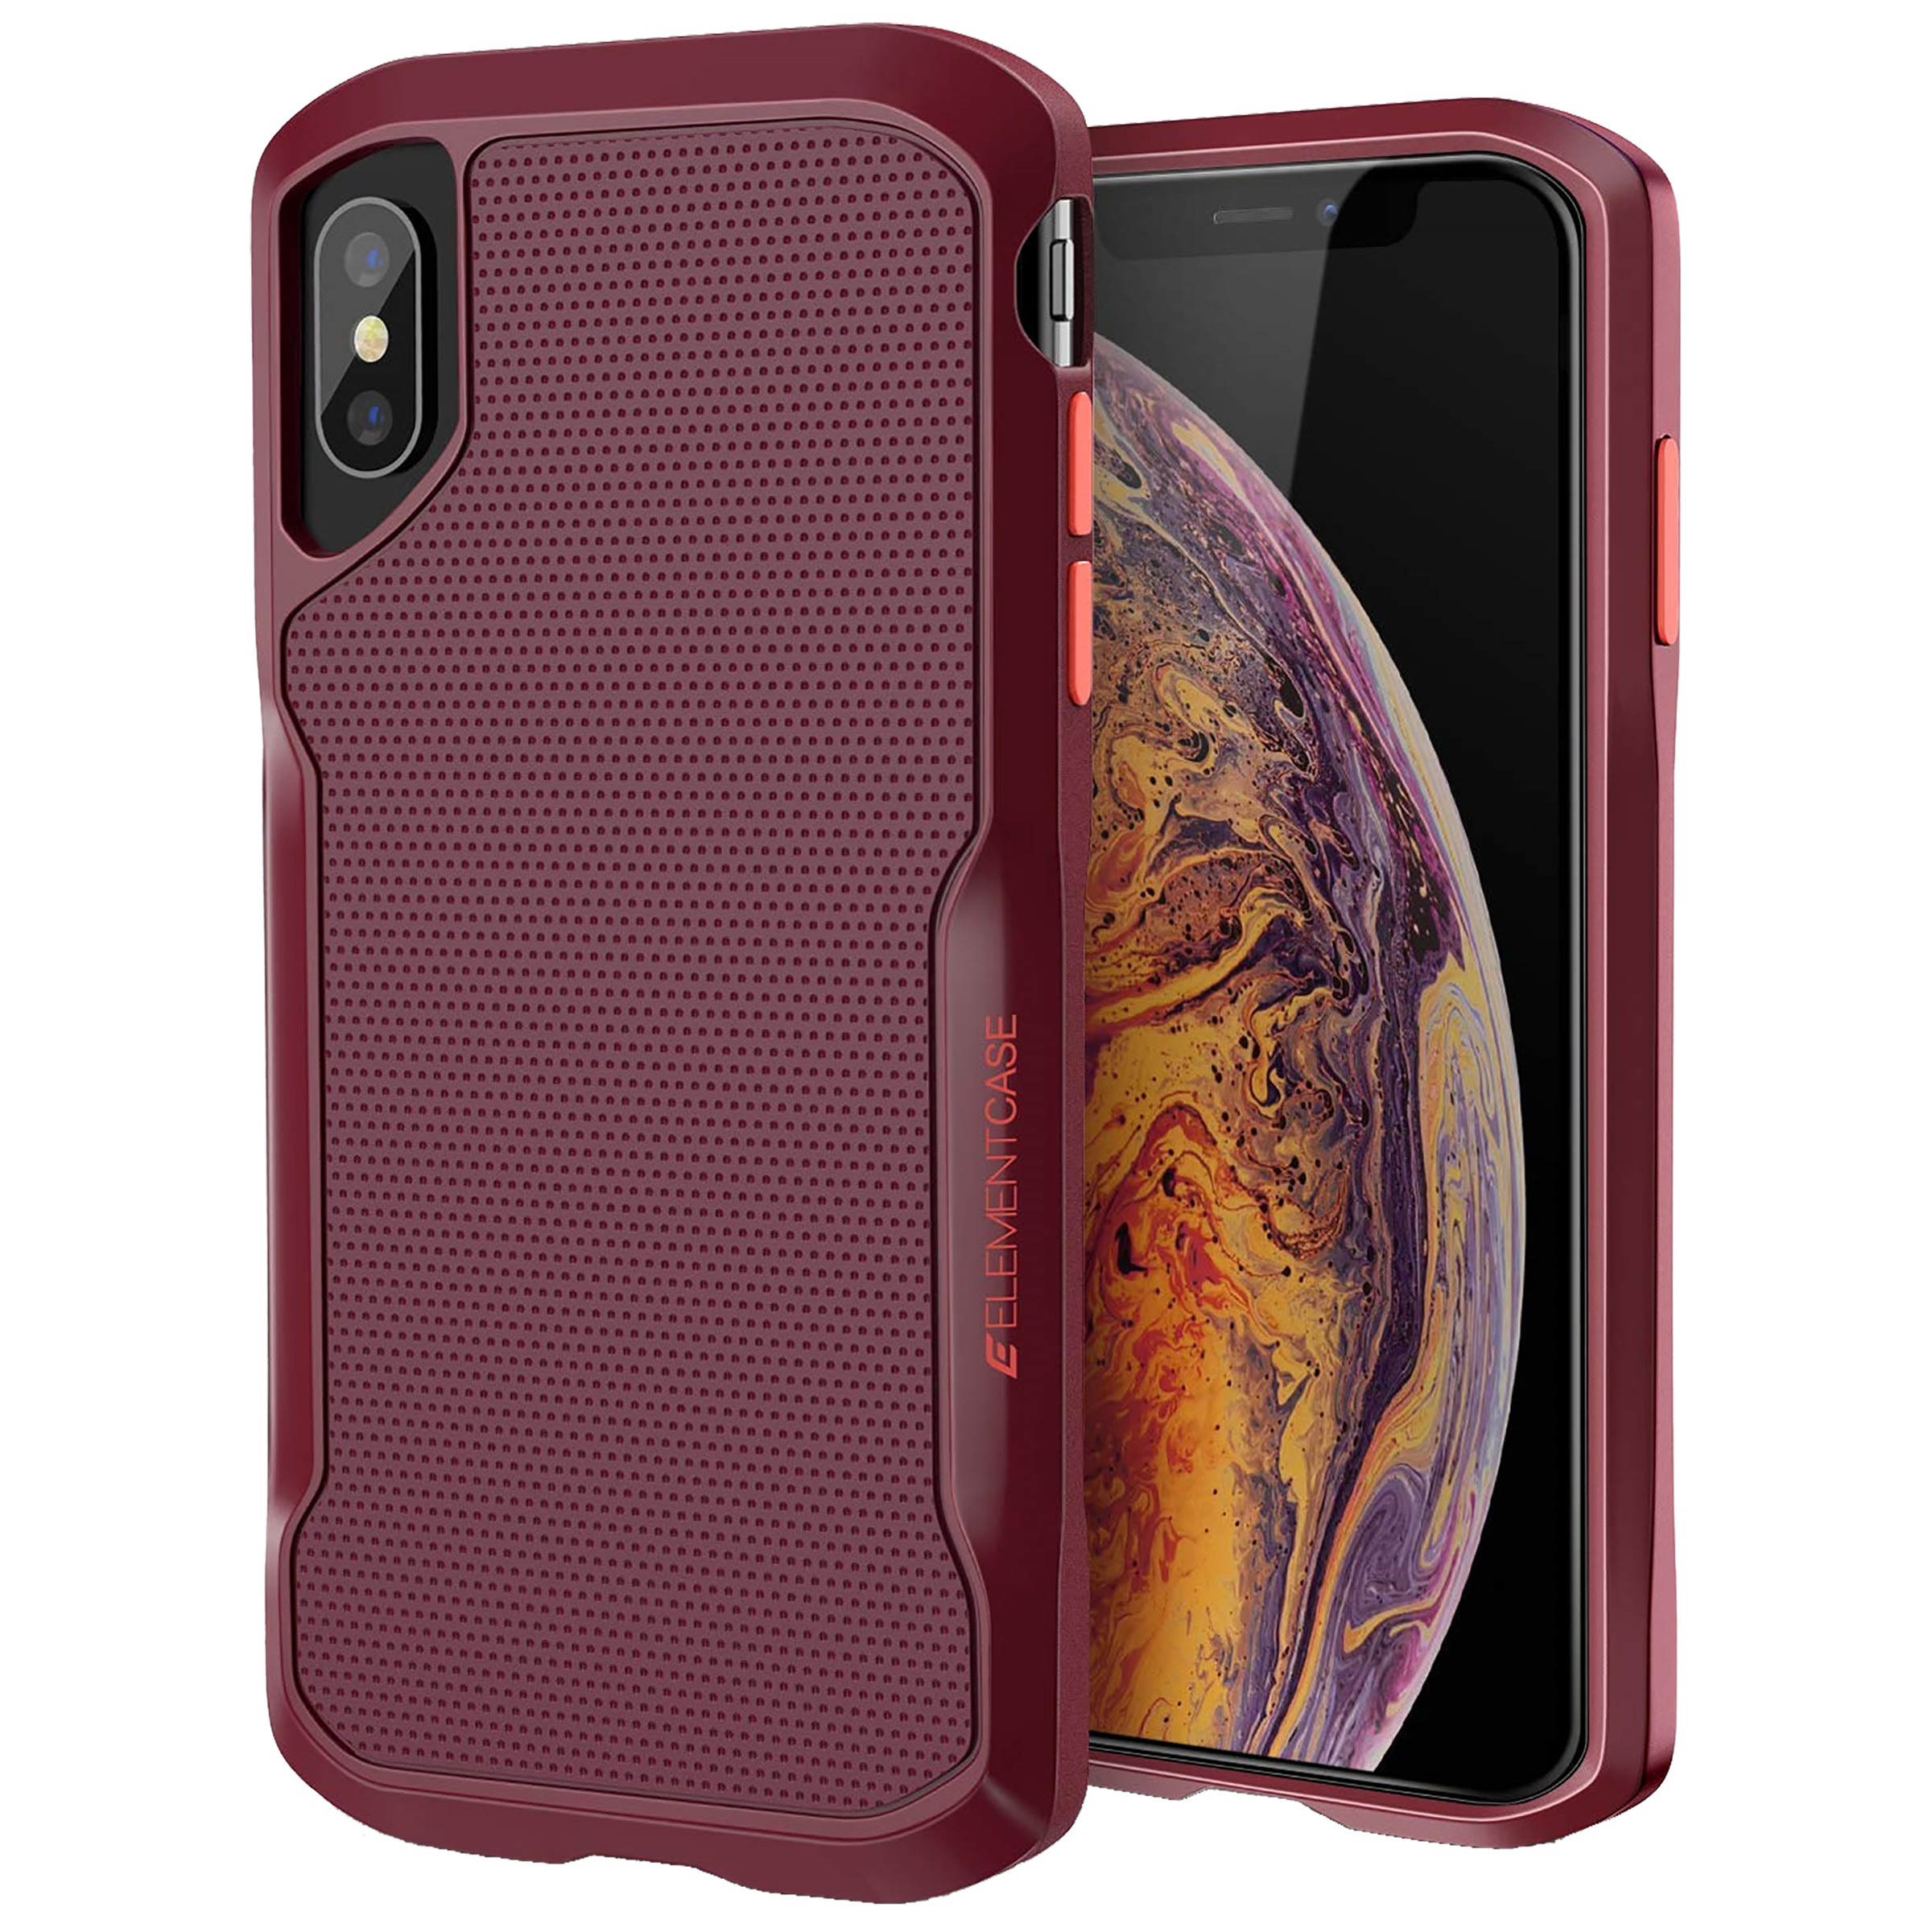 Element Case Shadow Thermoplastic Polyurethane Back Case For iPhone XS Max (Mil-Spec Drop Protection, EMT-322-192E-03, Red)_1